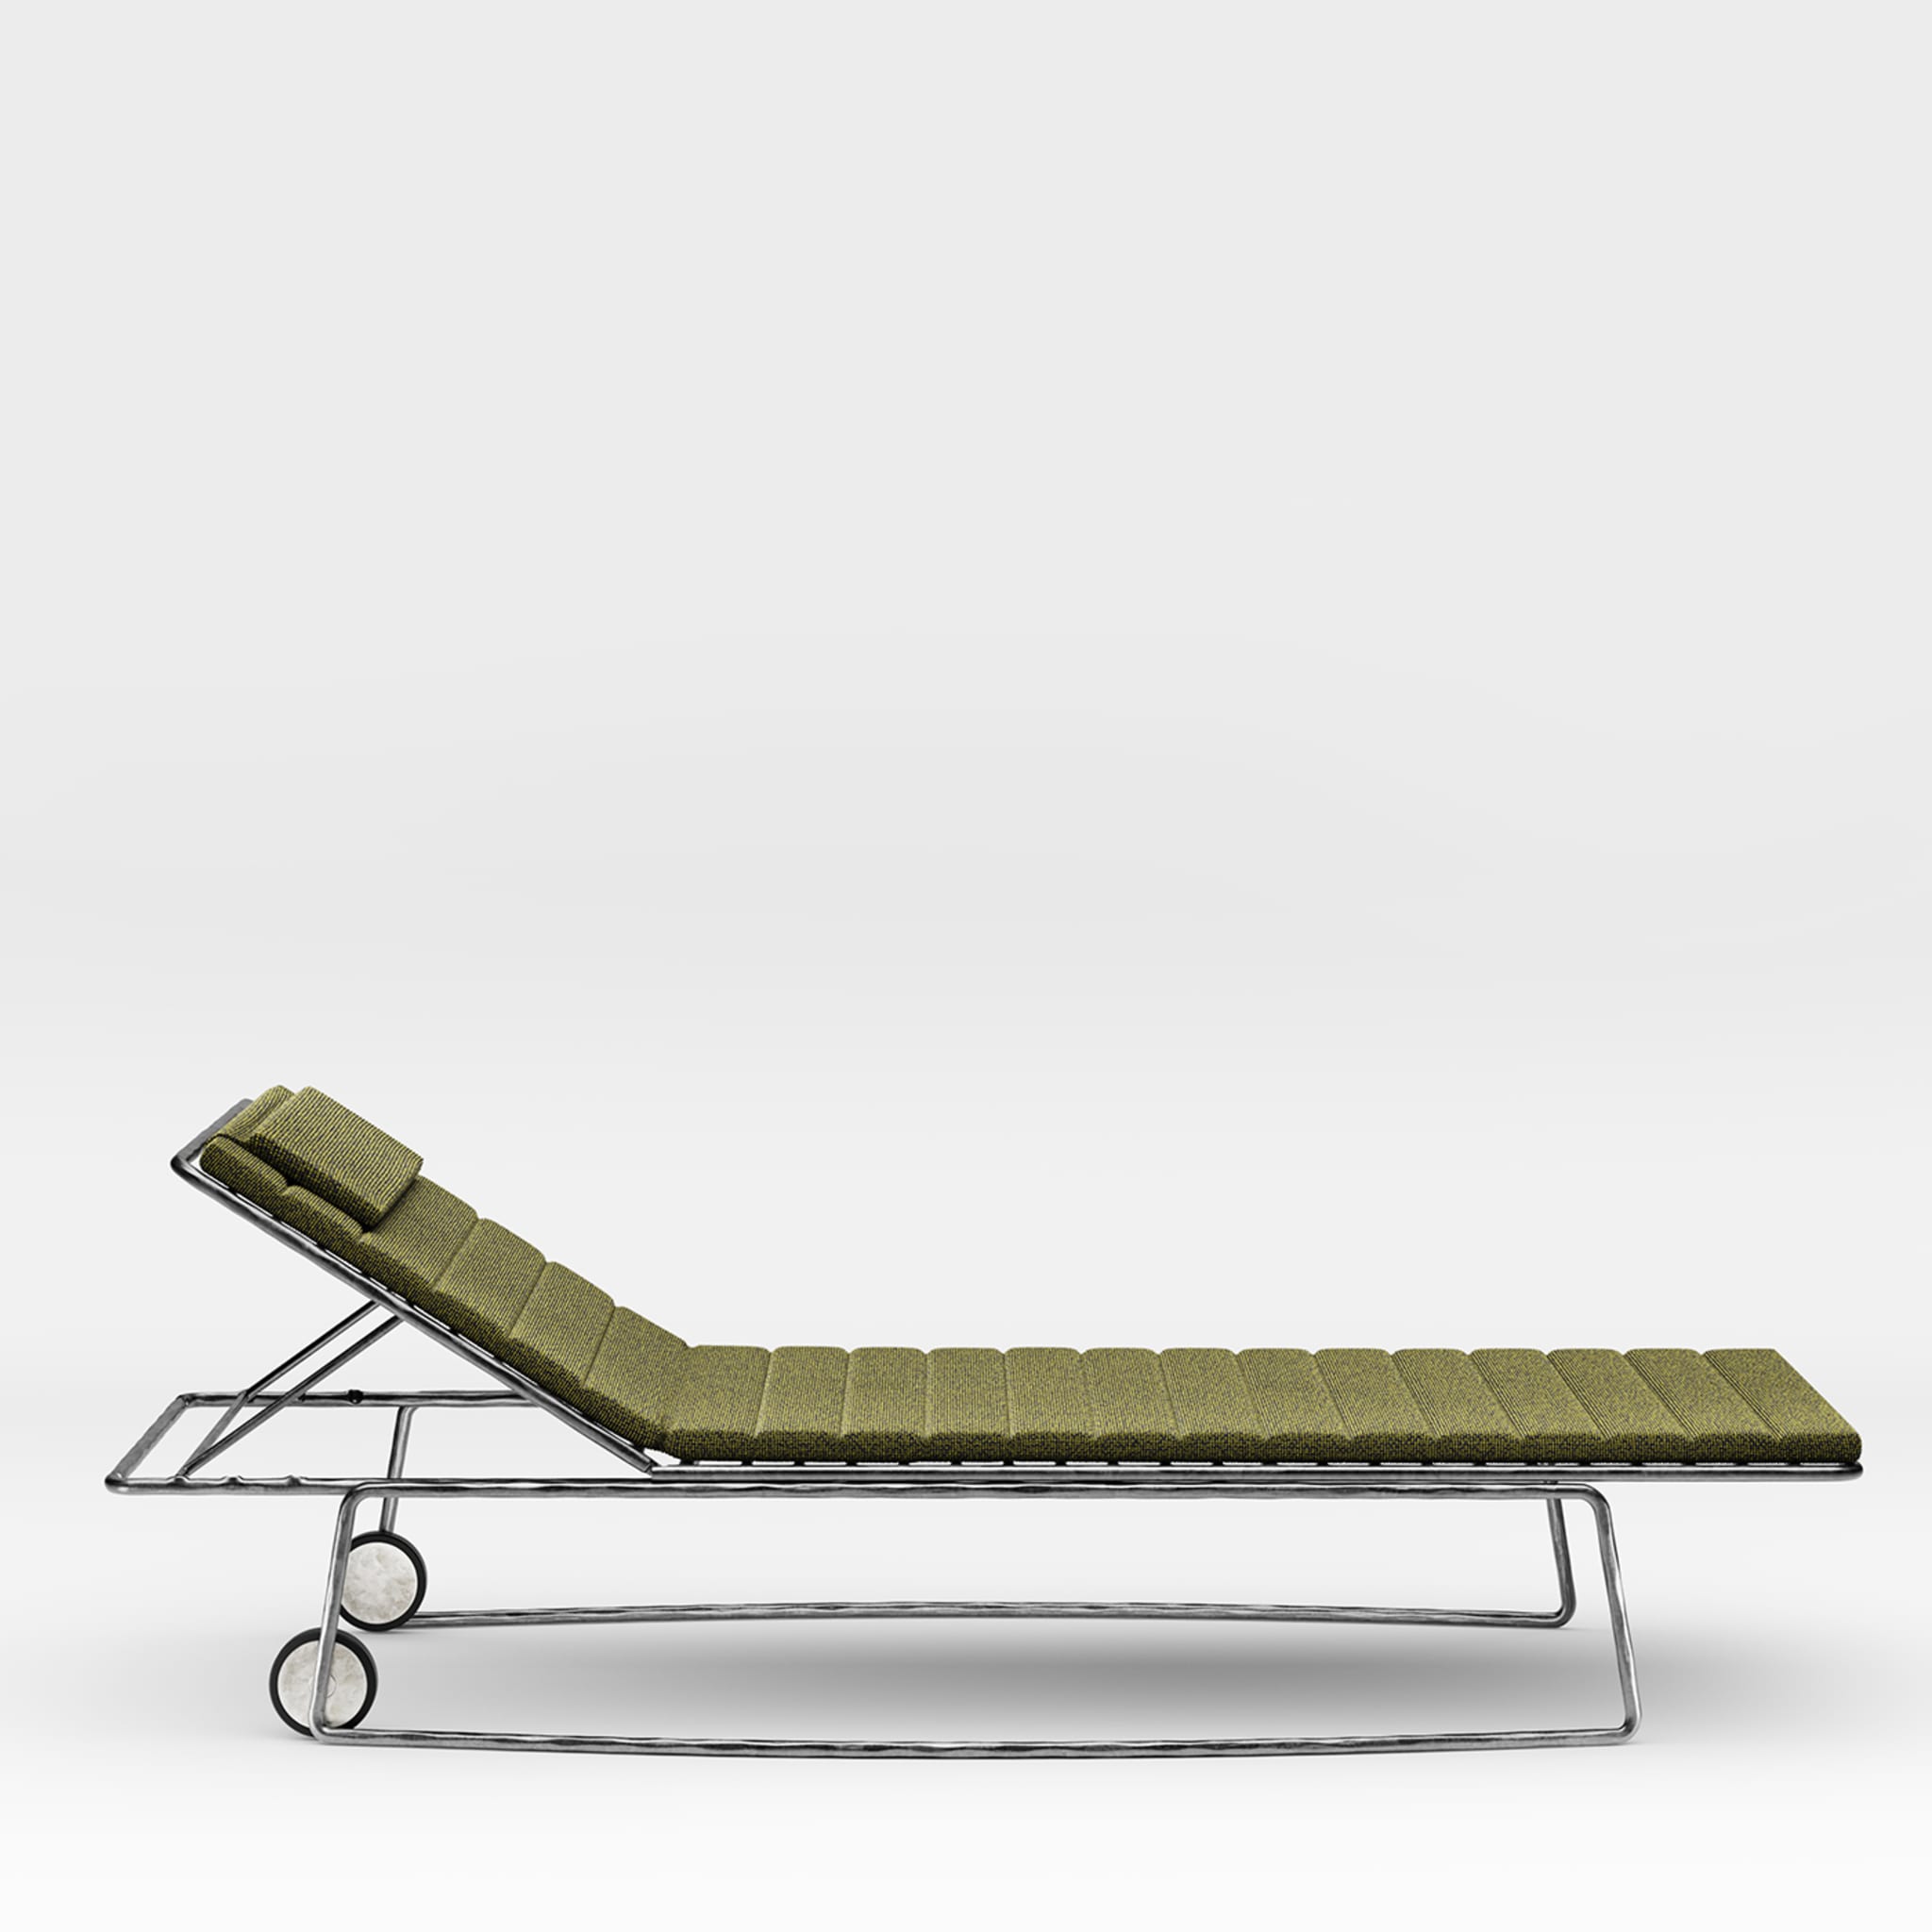 Type Green Sun Bed by Stormo Studio - Alternative view 1